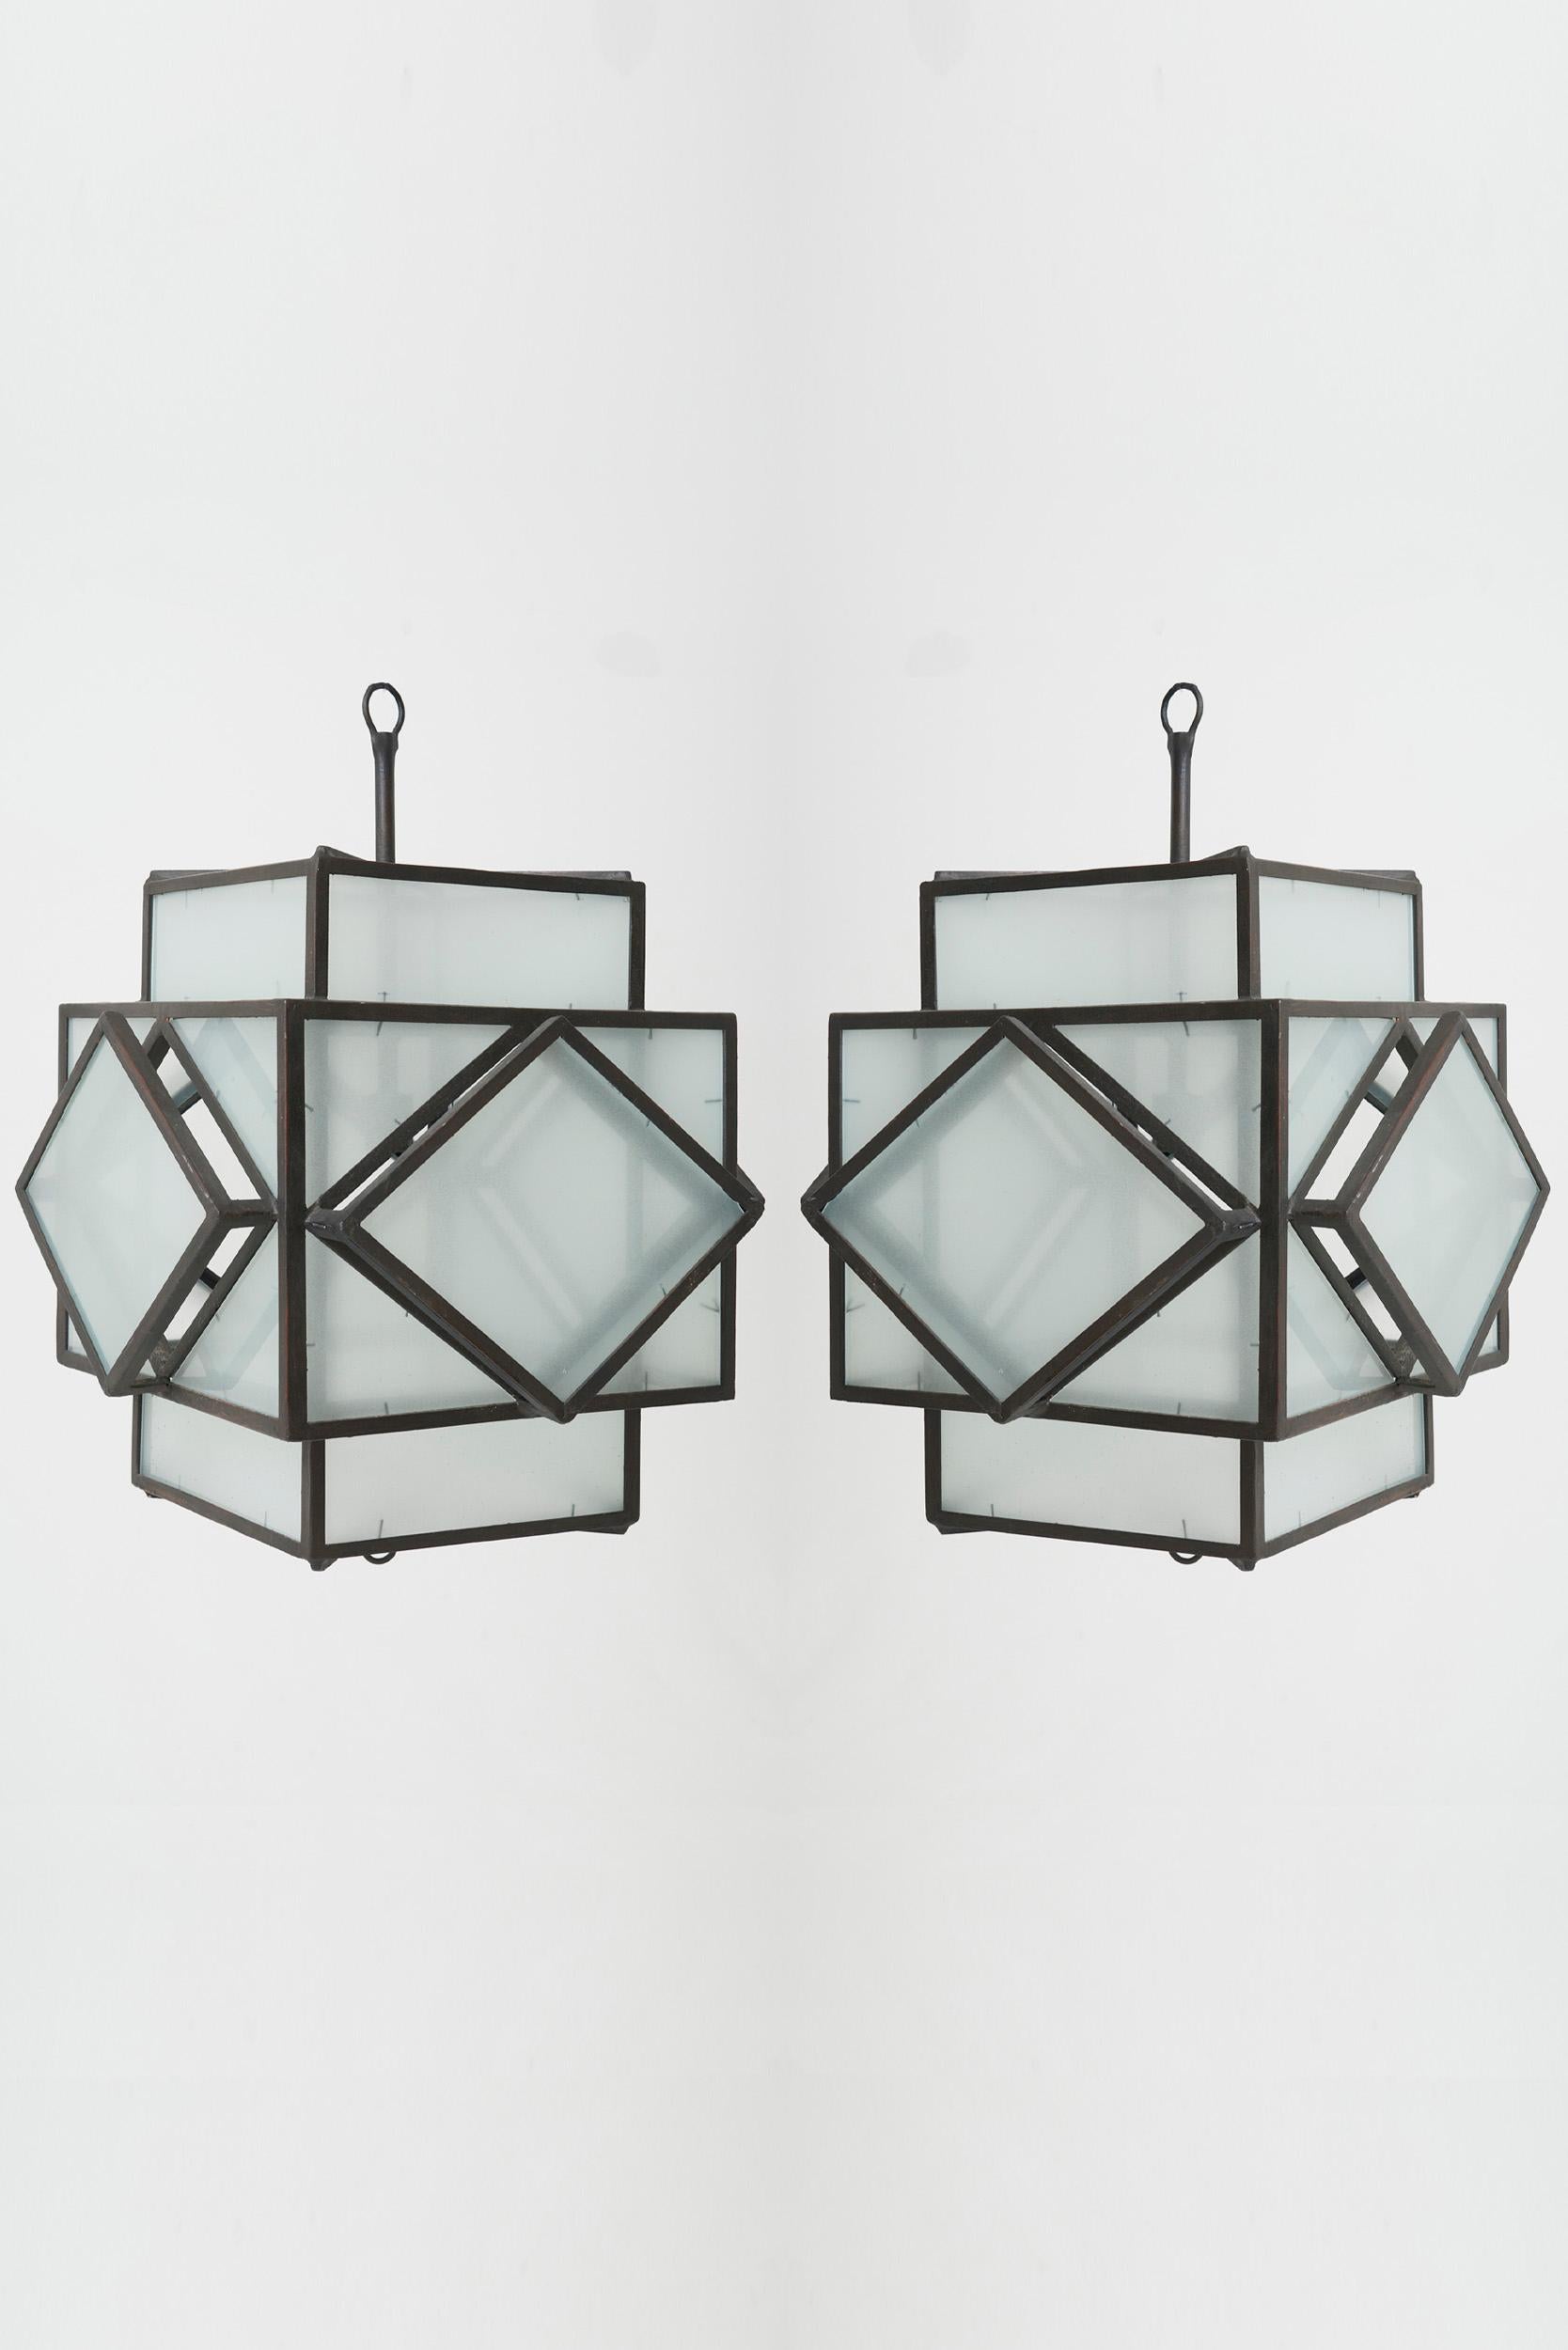 A pair of Art Deco style steel and glass lanterns, in the manner of Francis Jourdain.
Late 20th Century